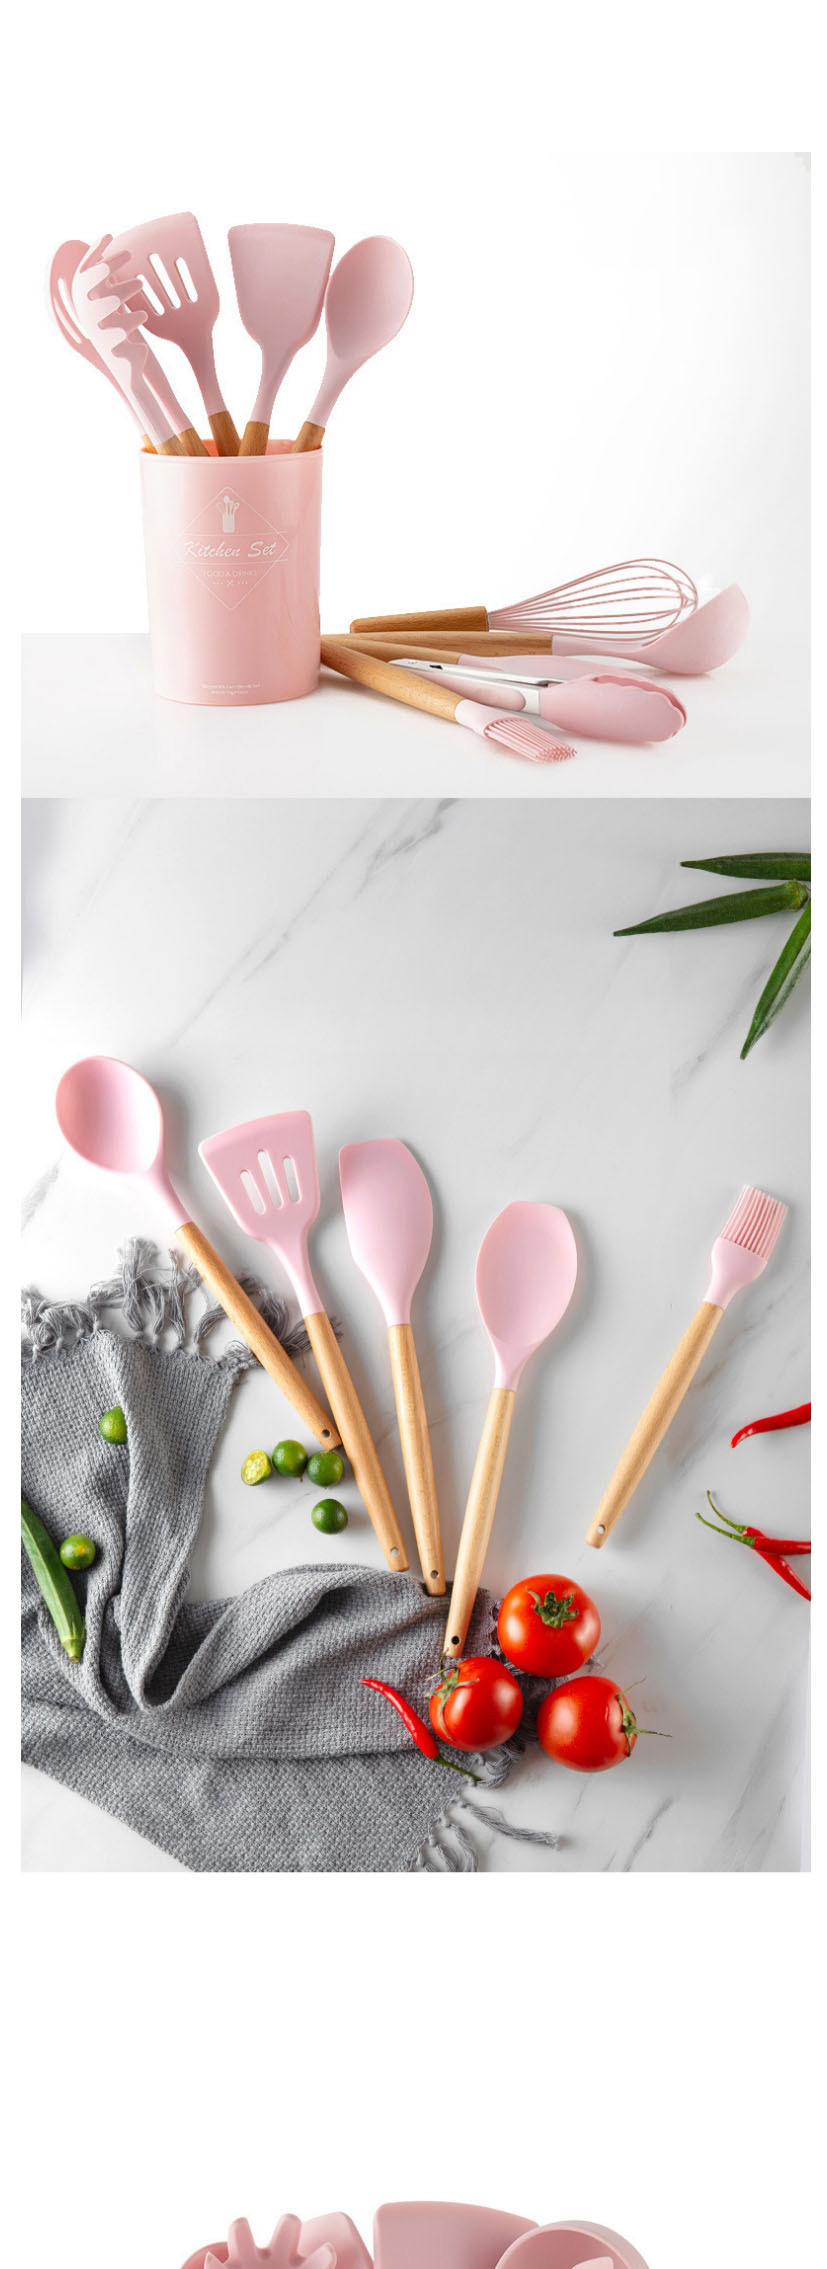 Fashion 11 Piece Set (excluding Bin) Pink Solid Wood Handle With Bucket And Silica Gel Kitchenware,Kitchen